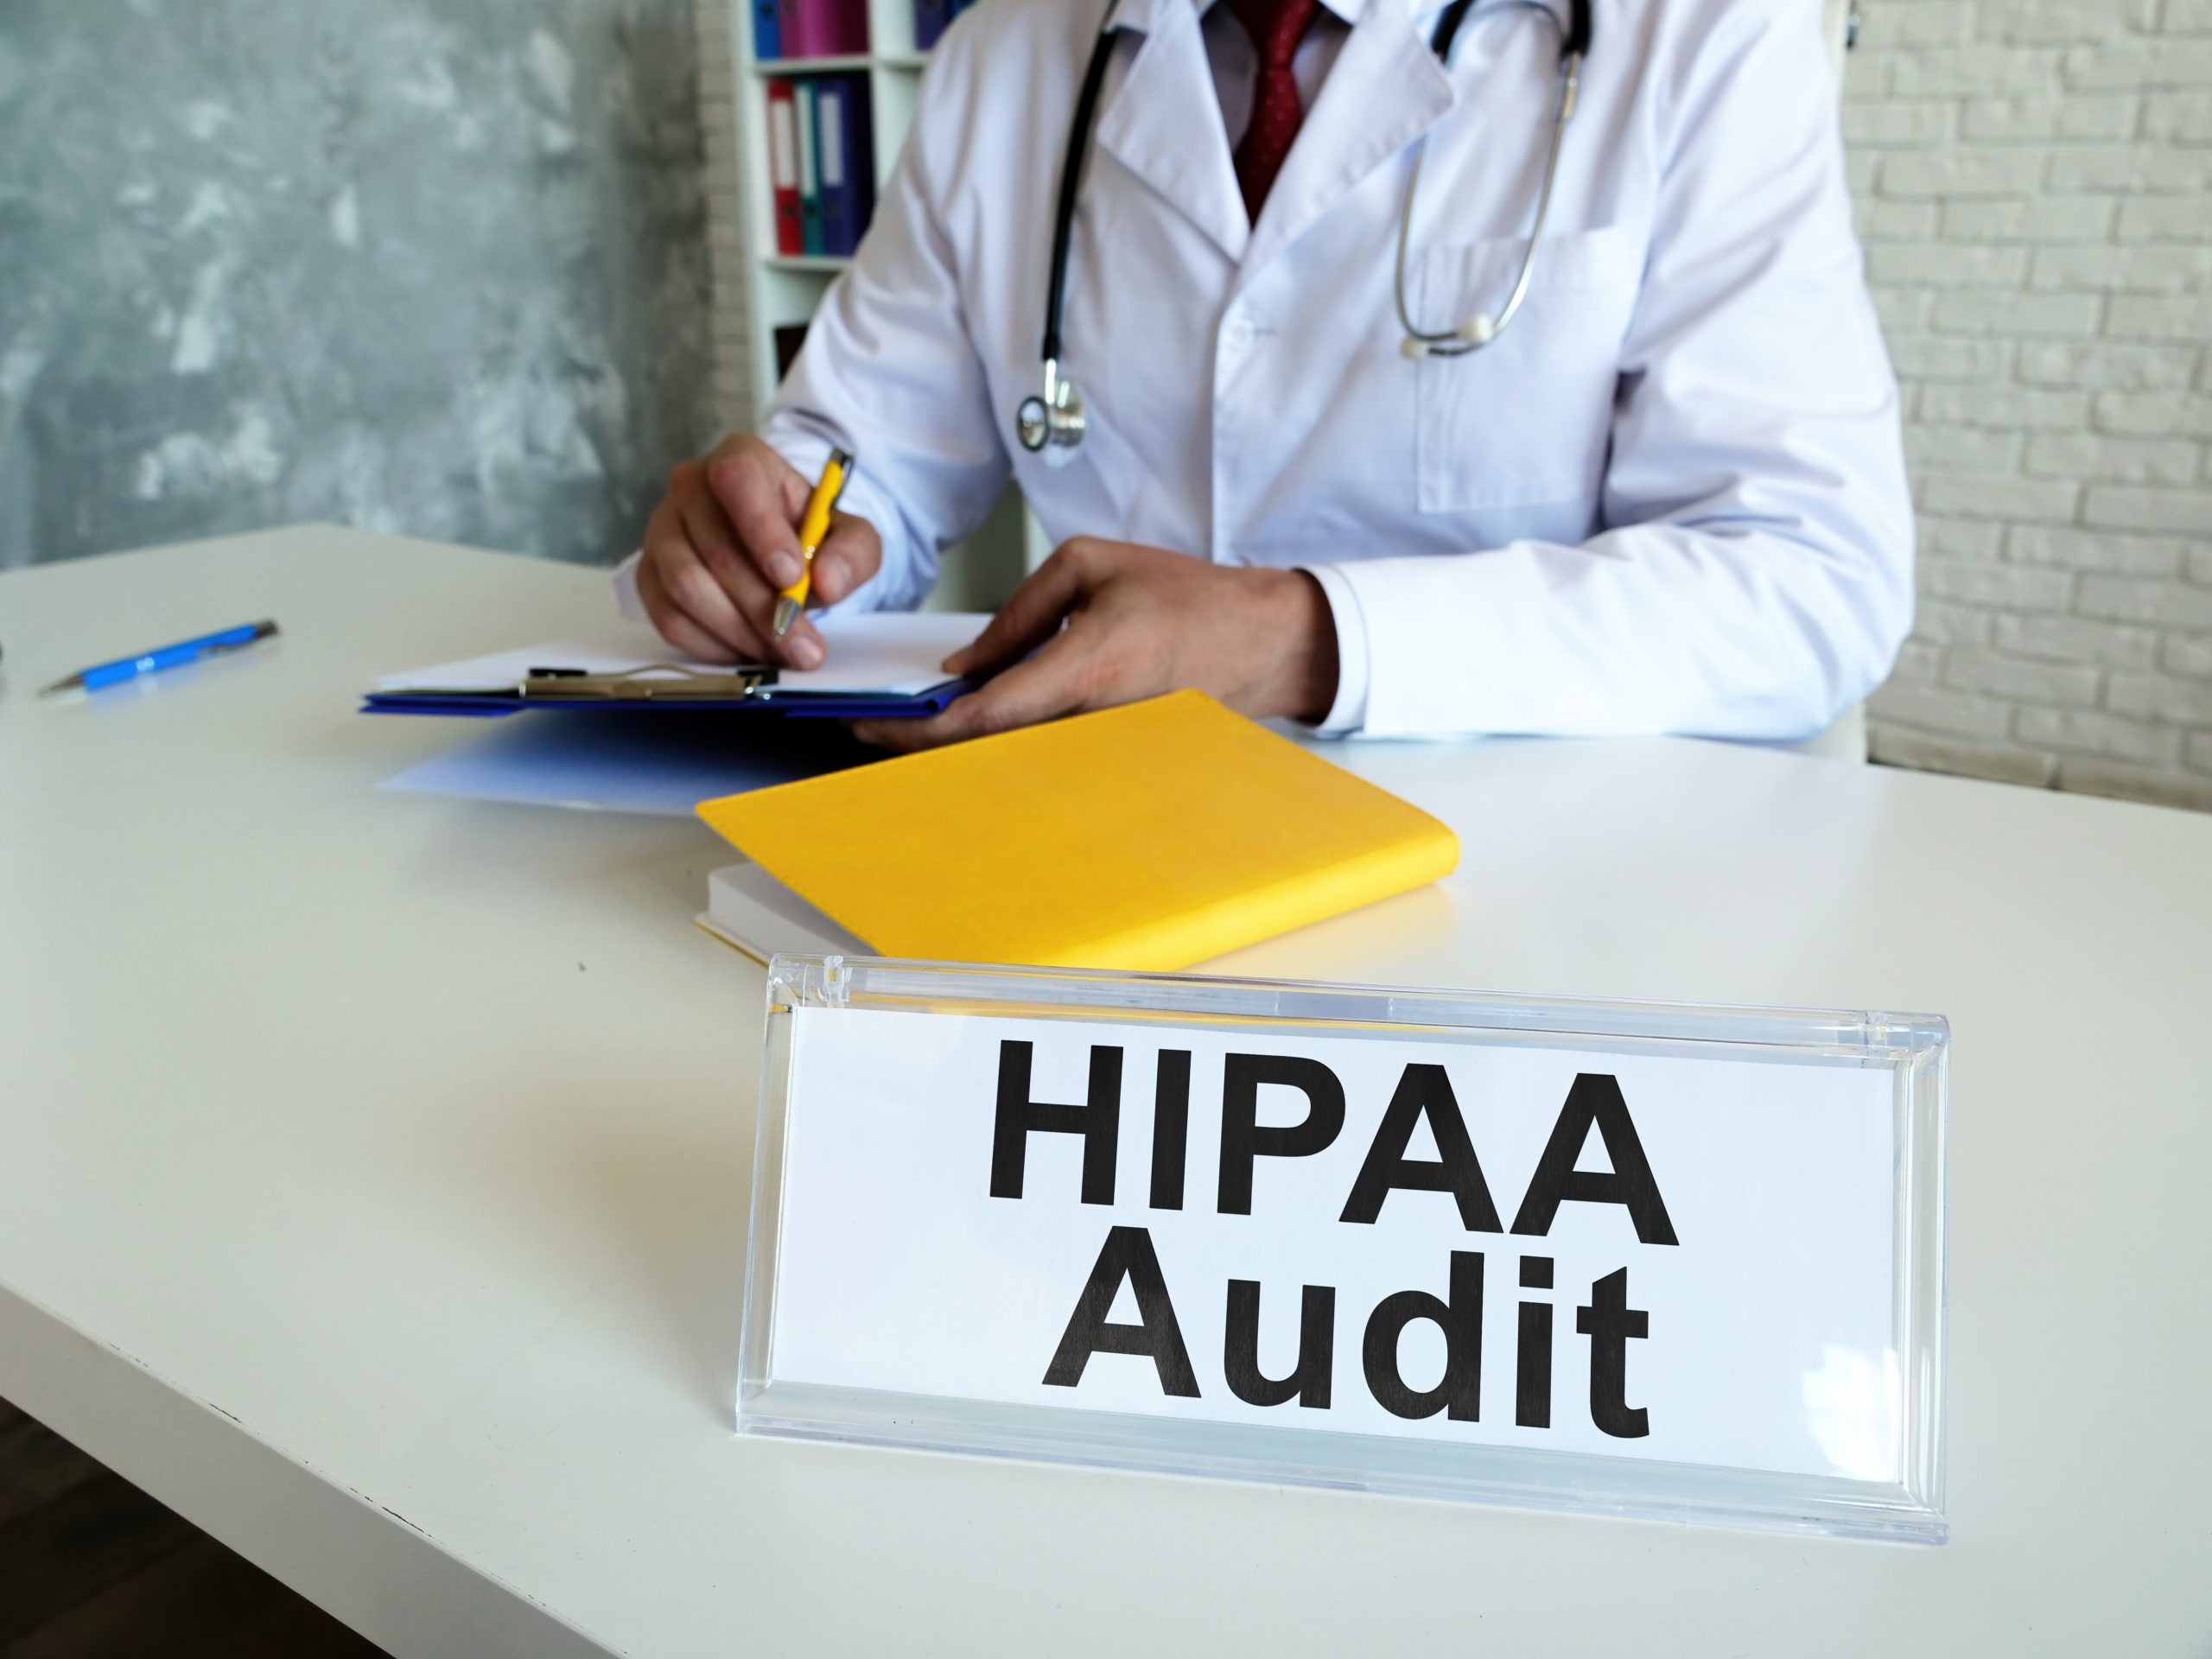 HIPAA audit concept. The doctor works with medical documents.